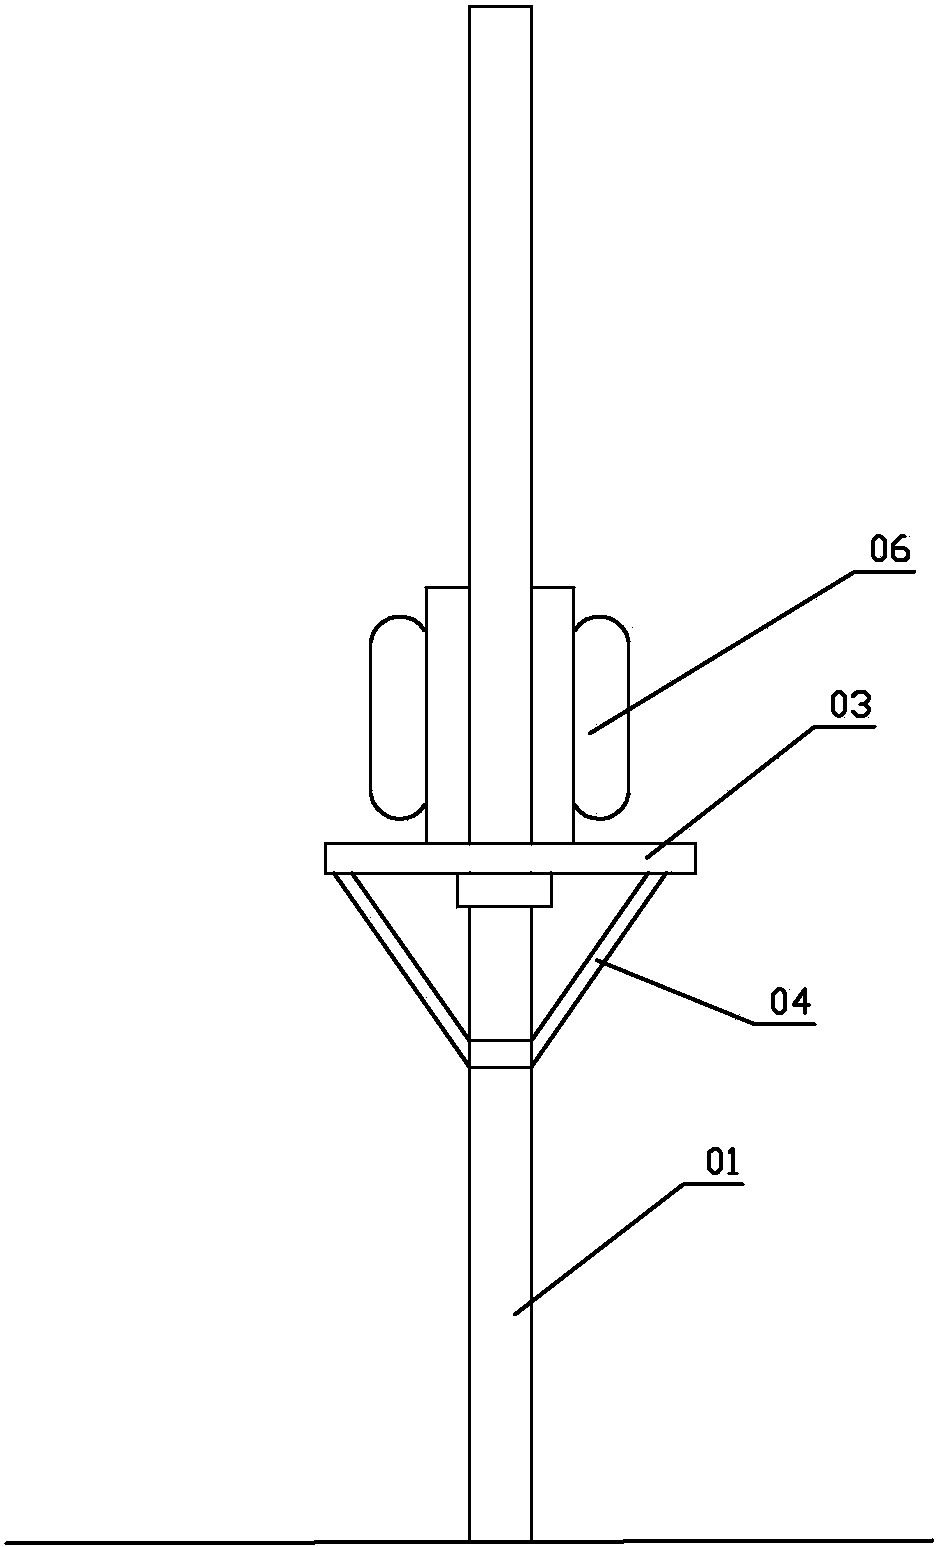 Power transformer outdoor installation supporting device